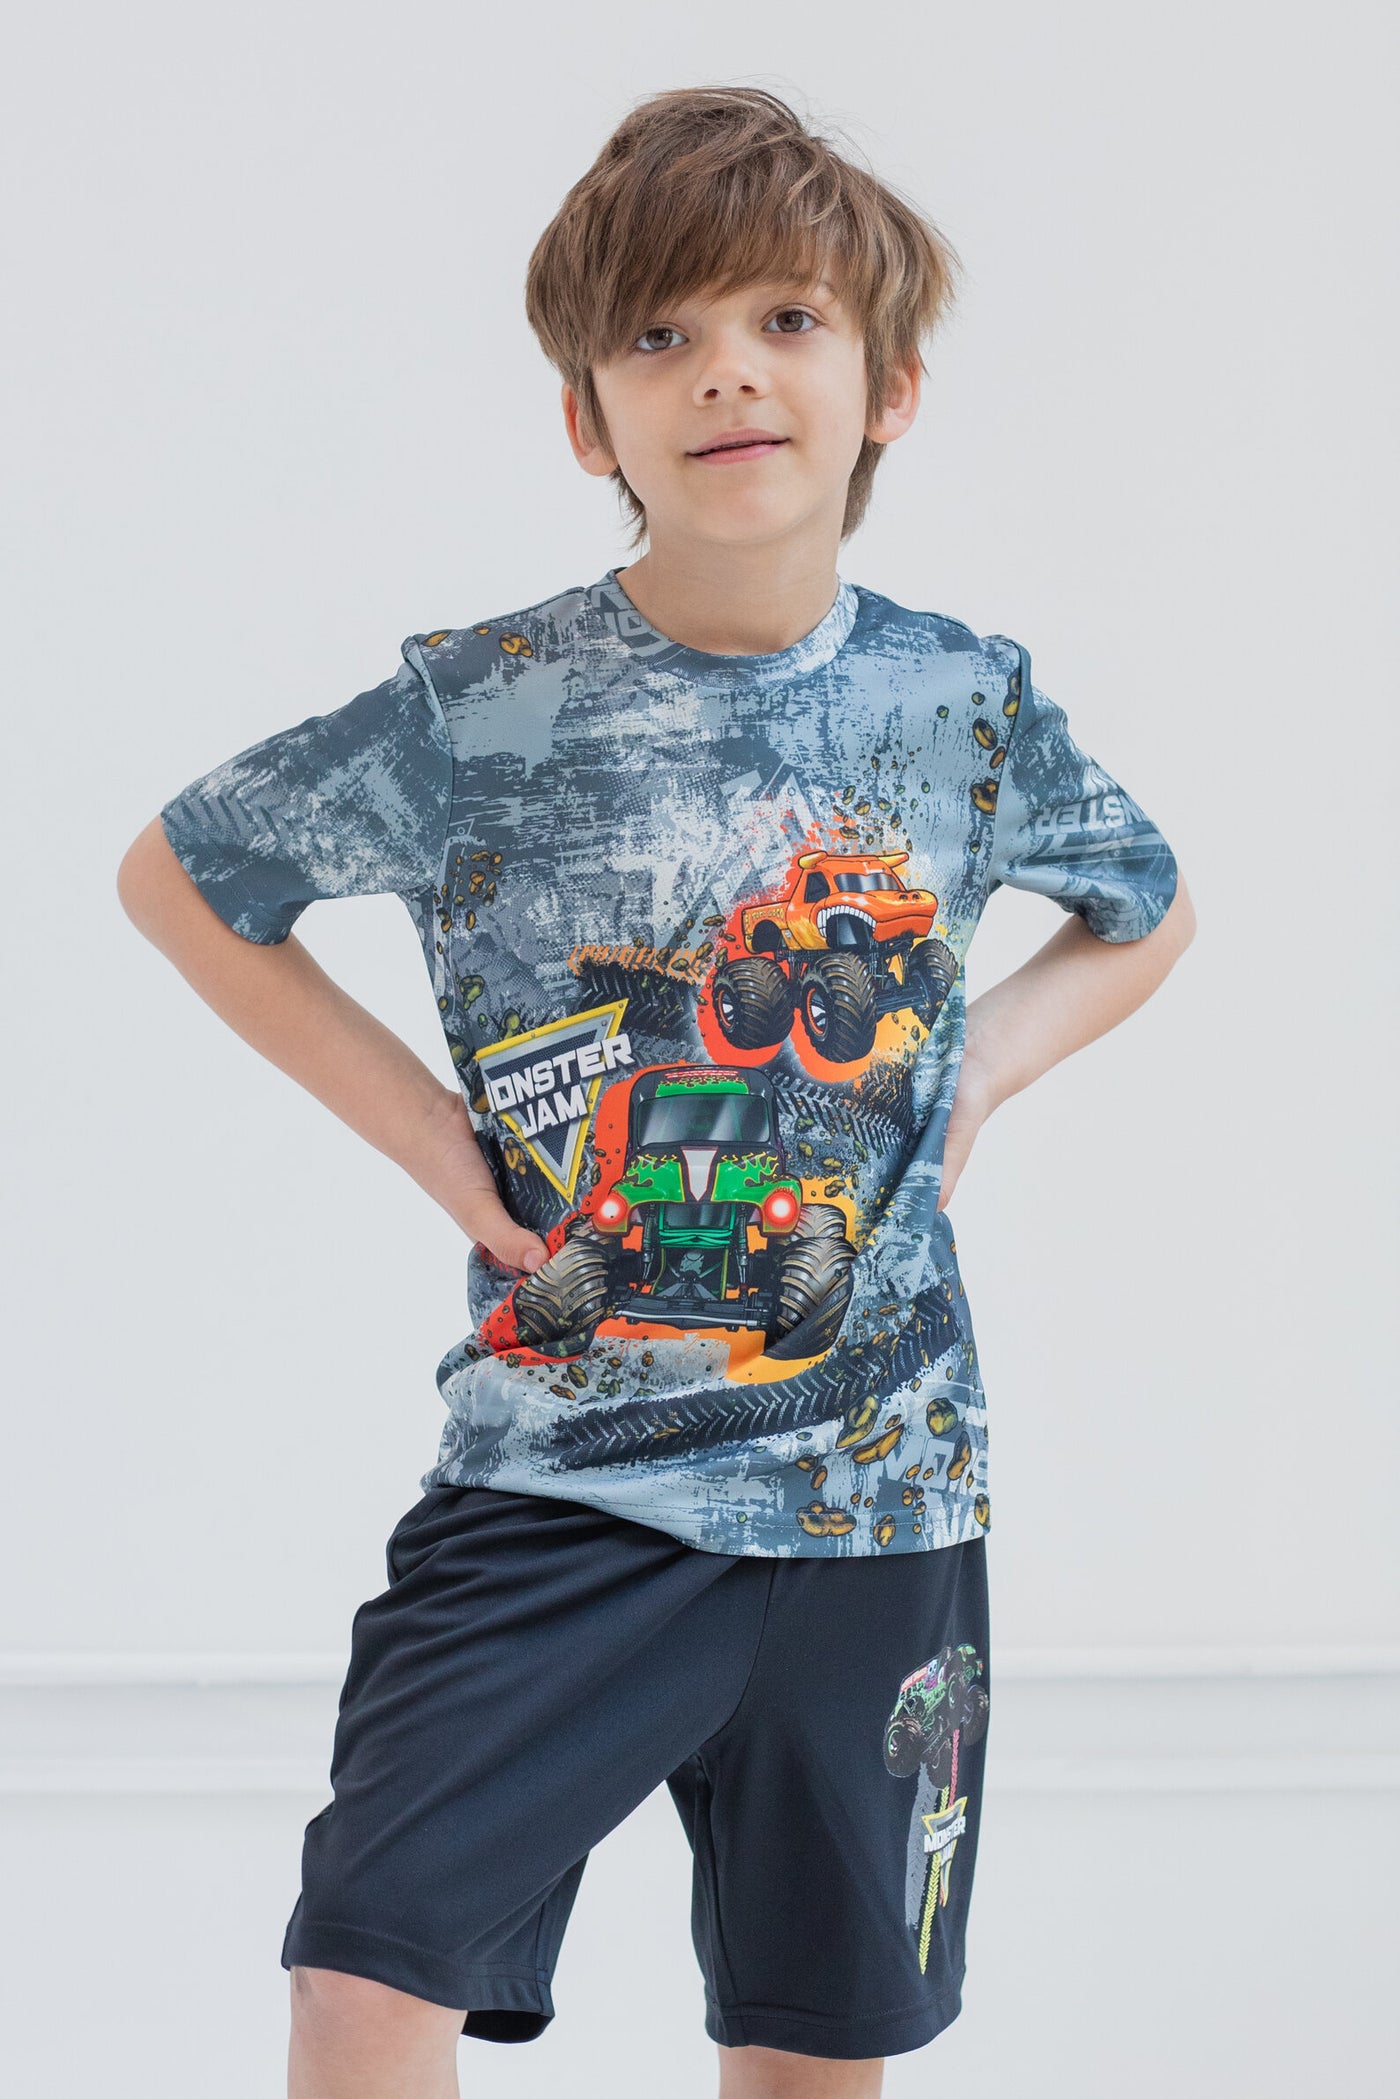 Monster Jam T-Shirt and Shorts Outfit Set